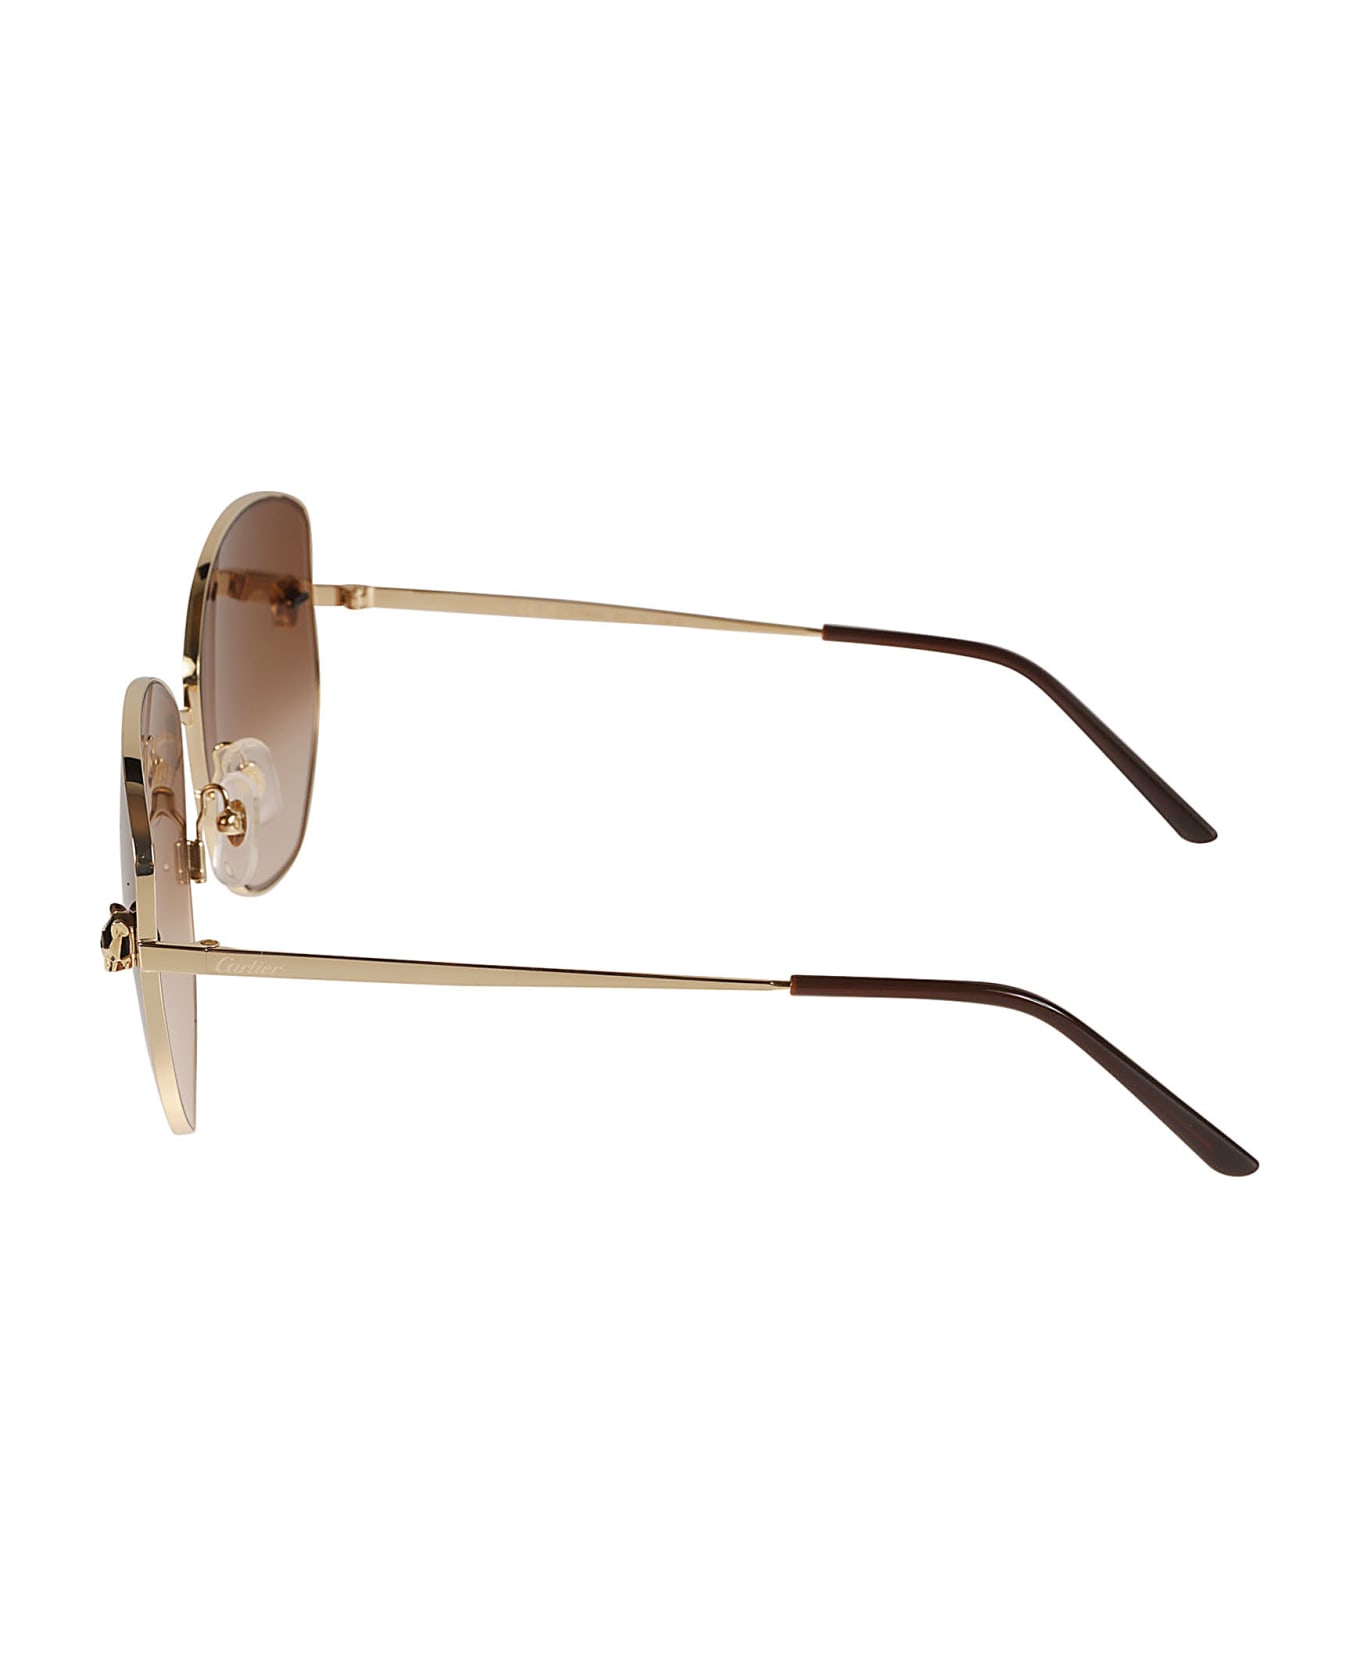 Cartier Eyewear Curve Square Sunglasses - Gold/Brown